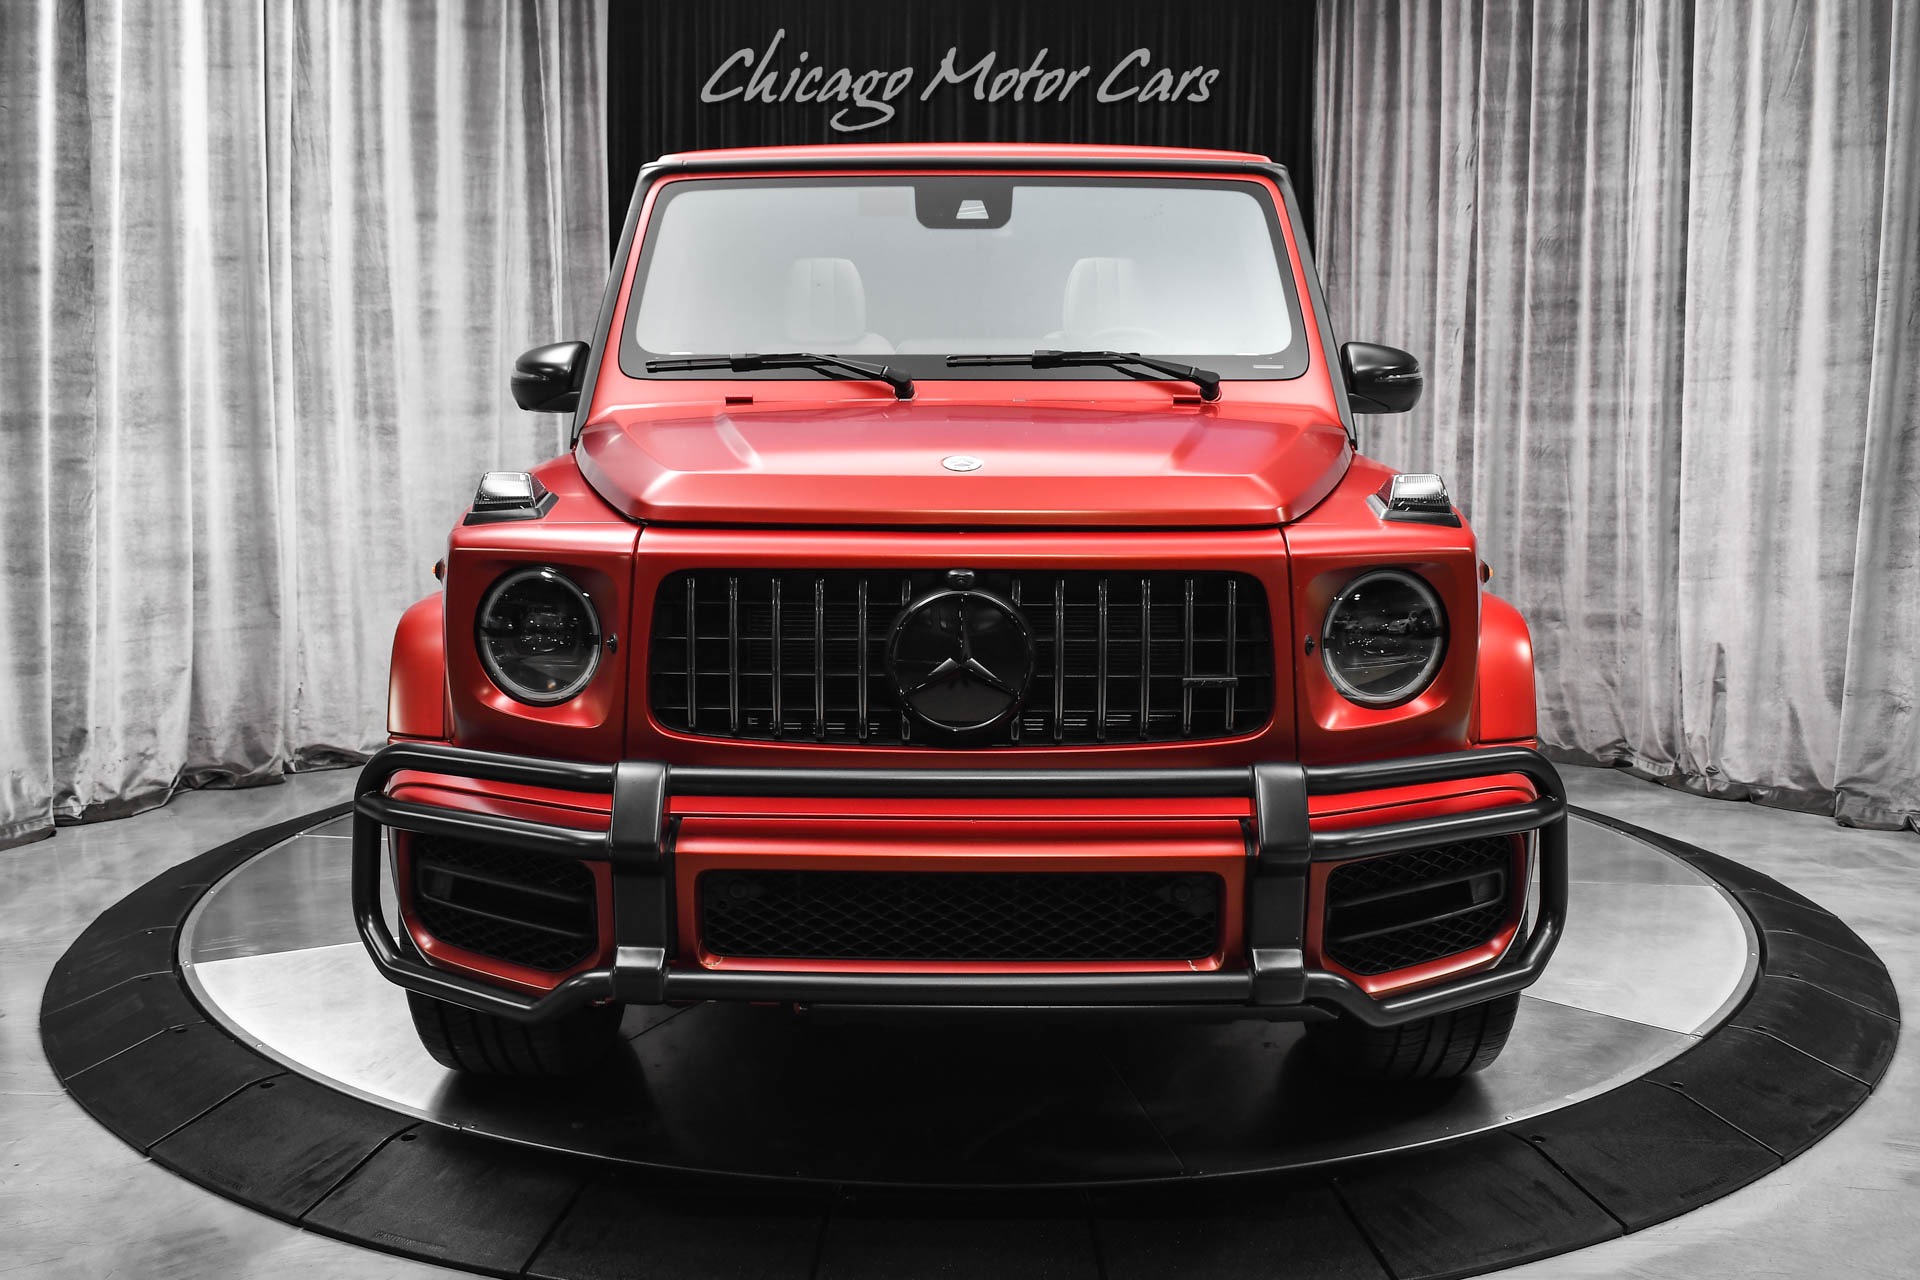 Used-2021-Mercedes-Benz-G63-AMG-4Matic-Rare-Manufaktur-Exclusive-Edition-Hyazinth-Red-Matte